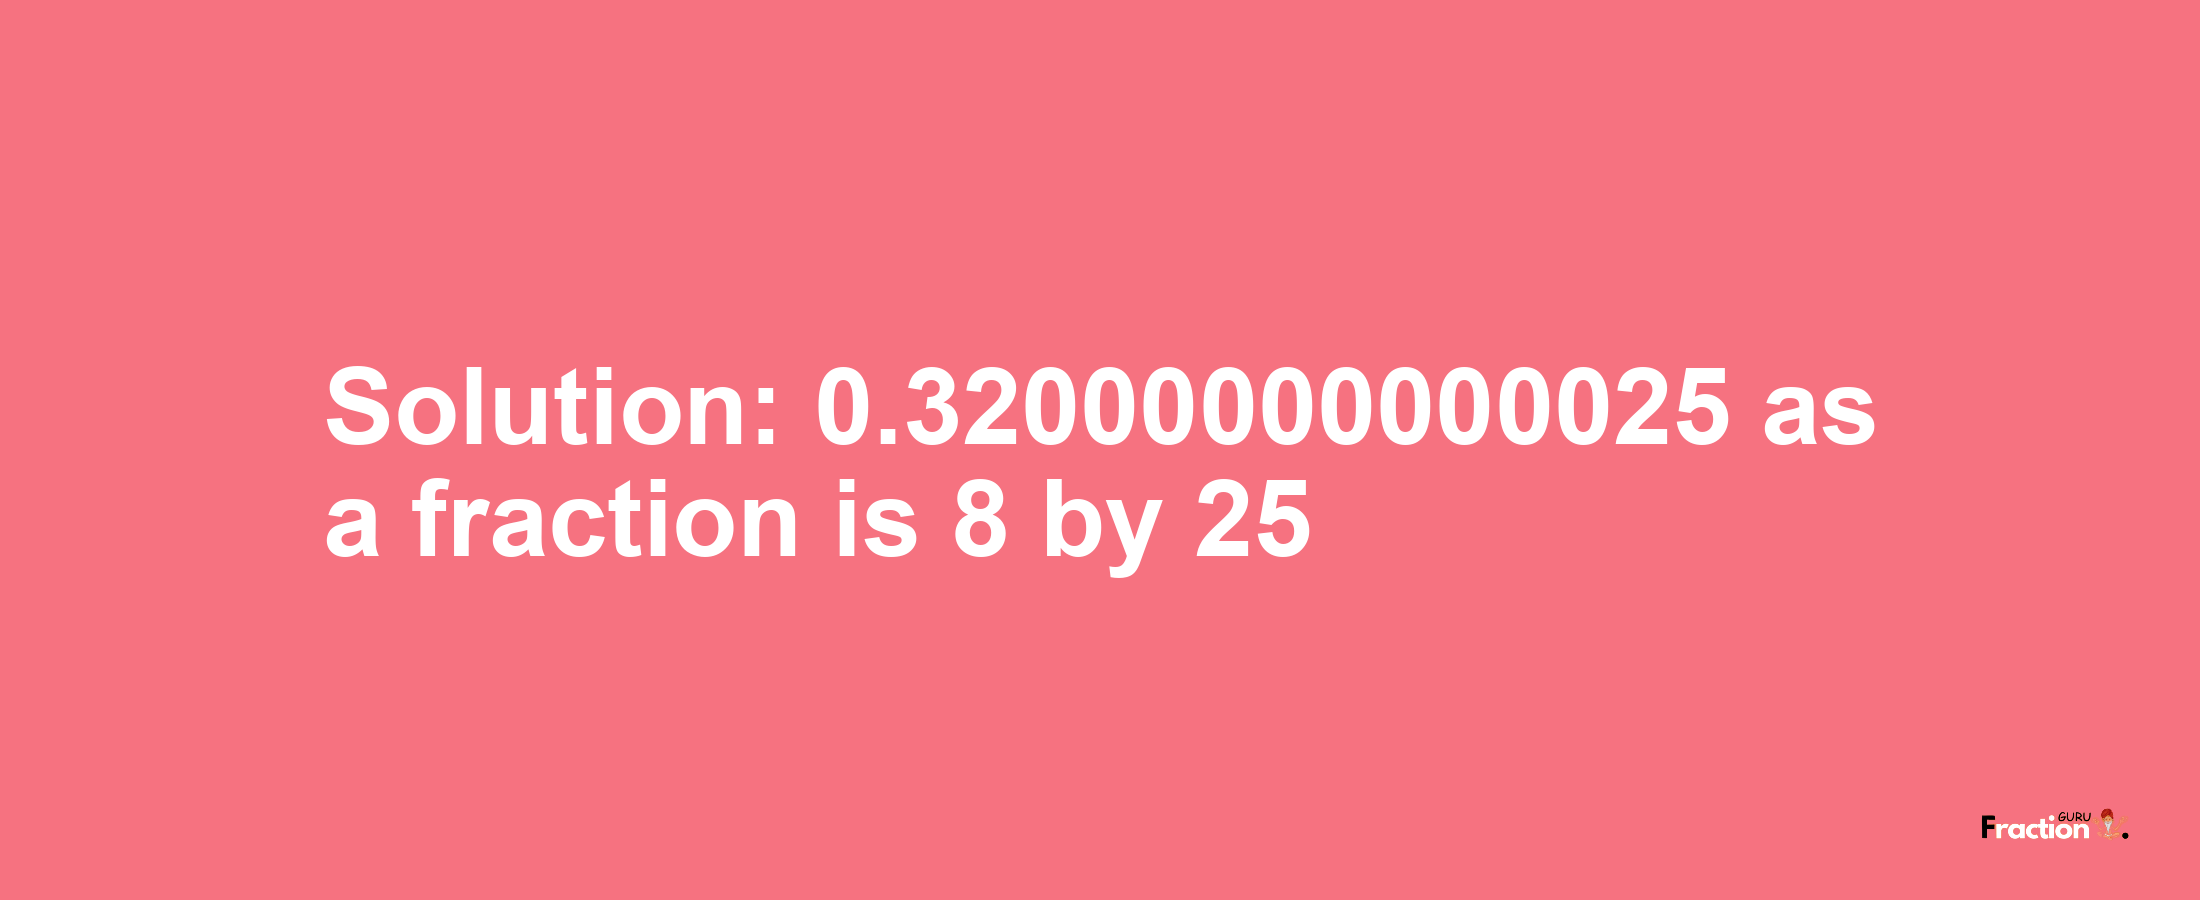 Solution:0.32000000000025 as a fraction is 8/25